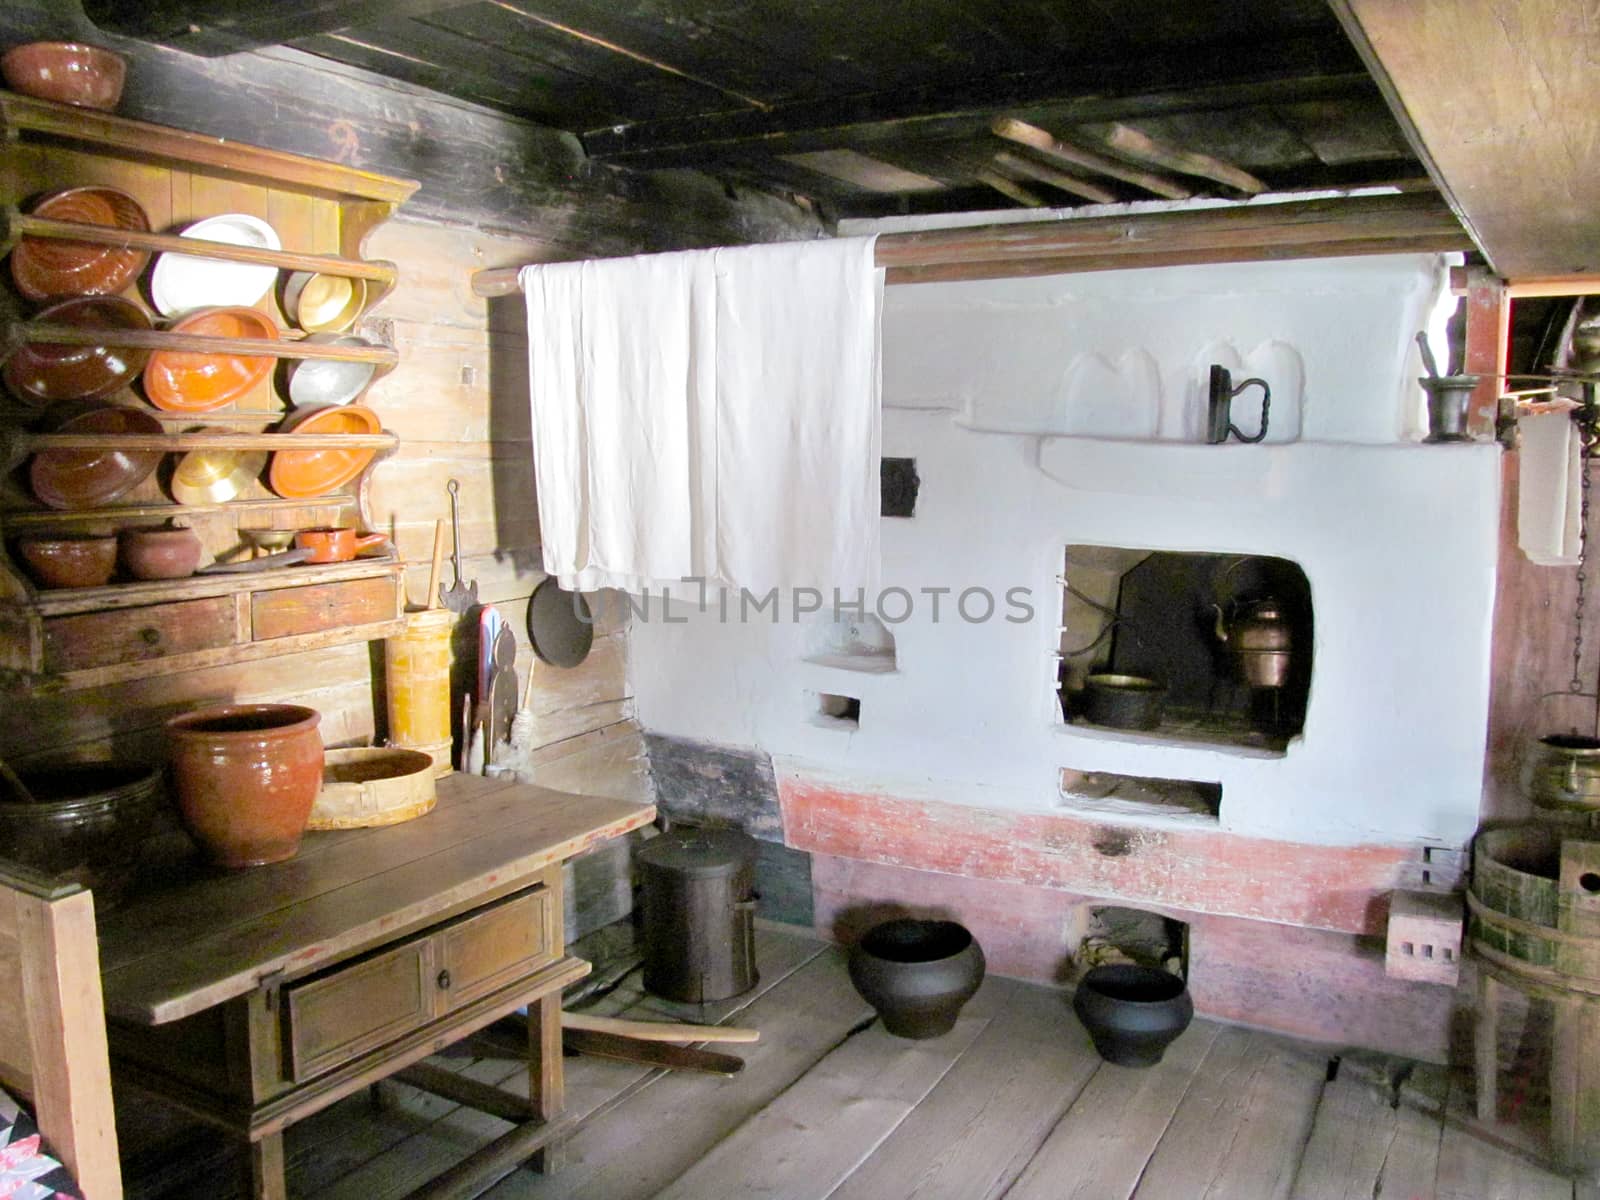 Russian stove with attributes of the last century in the foreground 
such as iron, 
tub, clay jugs, plates and cups made of clay,
cast iron and other dining utensils.
